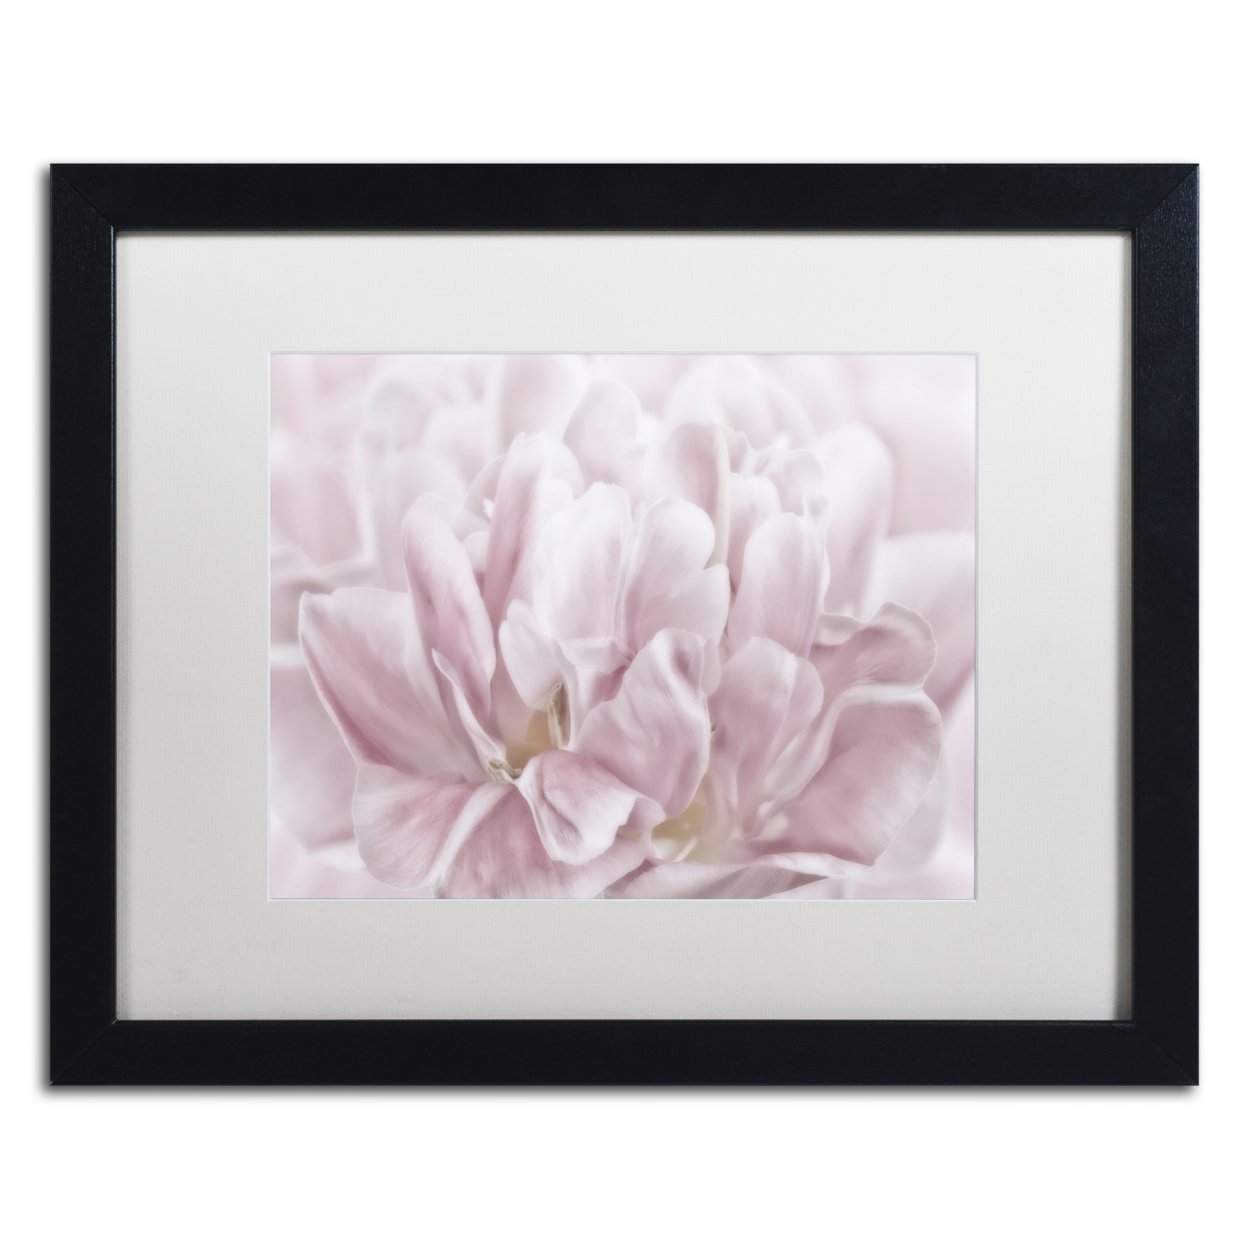 Cora Niele 'Double Pink Tulip' Black Wooden Framed Art 18 X 22 Inches